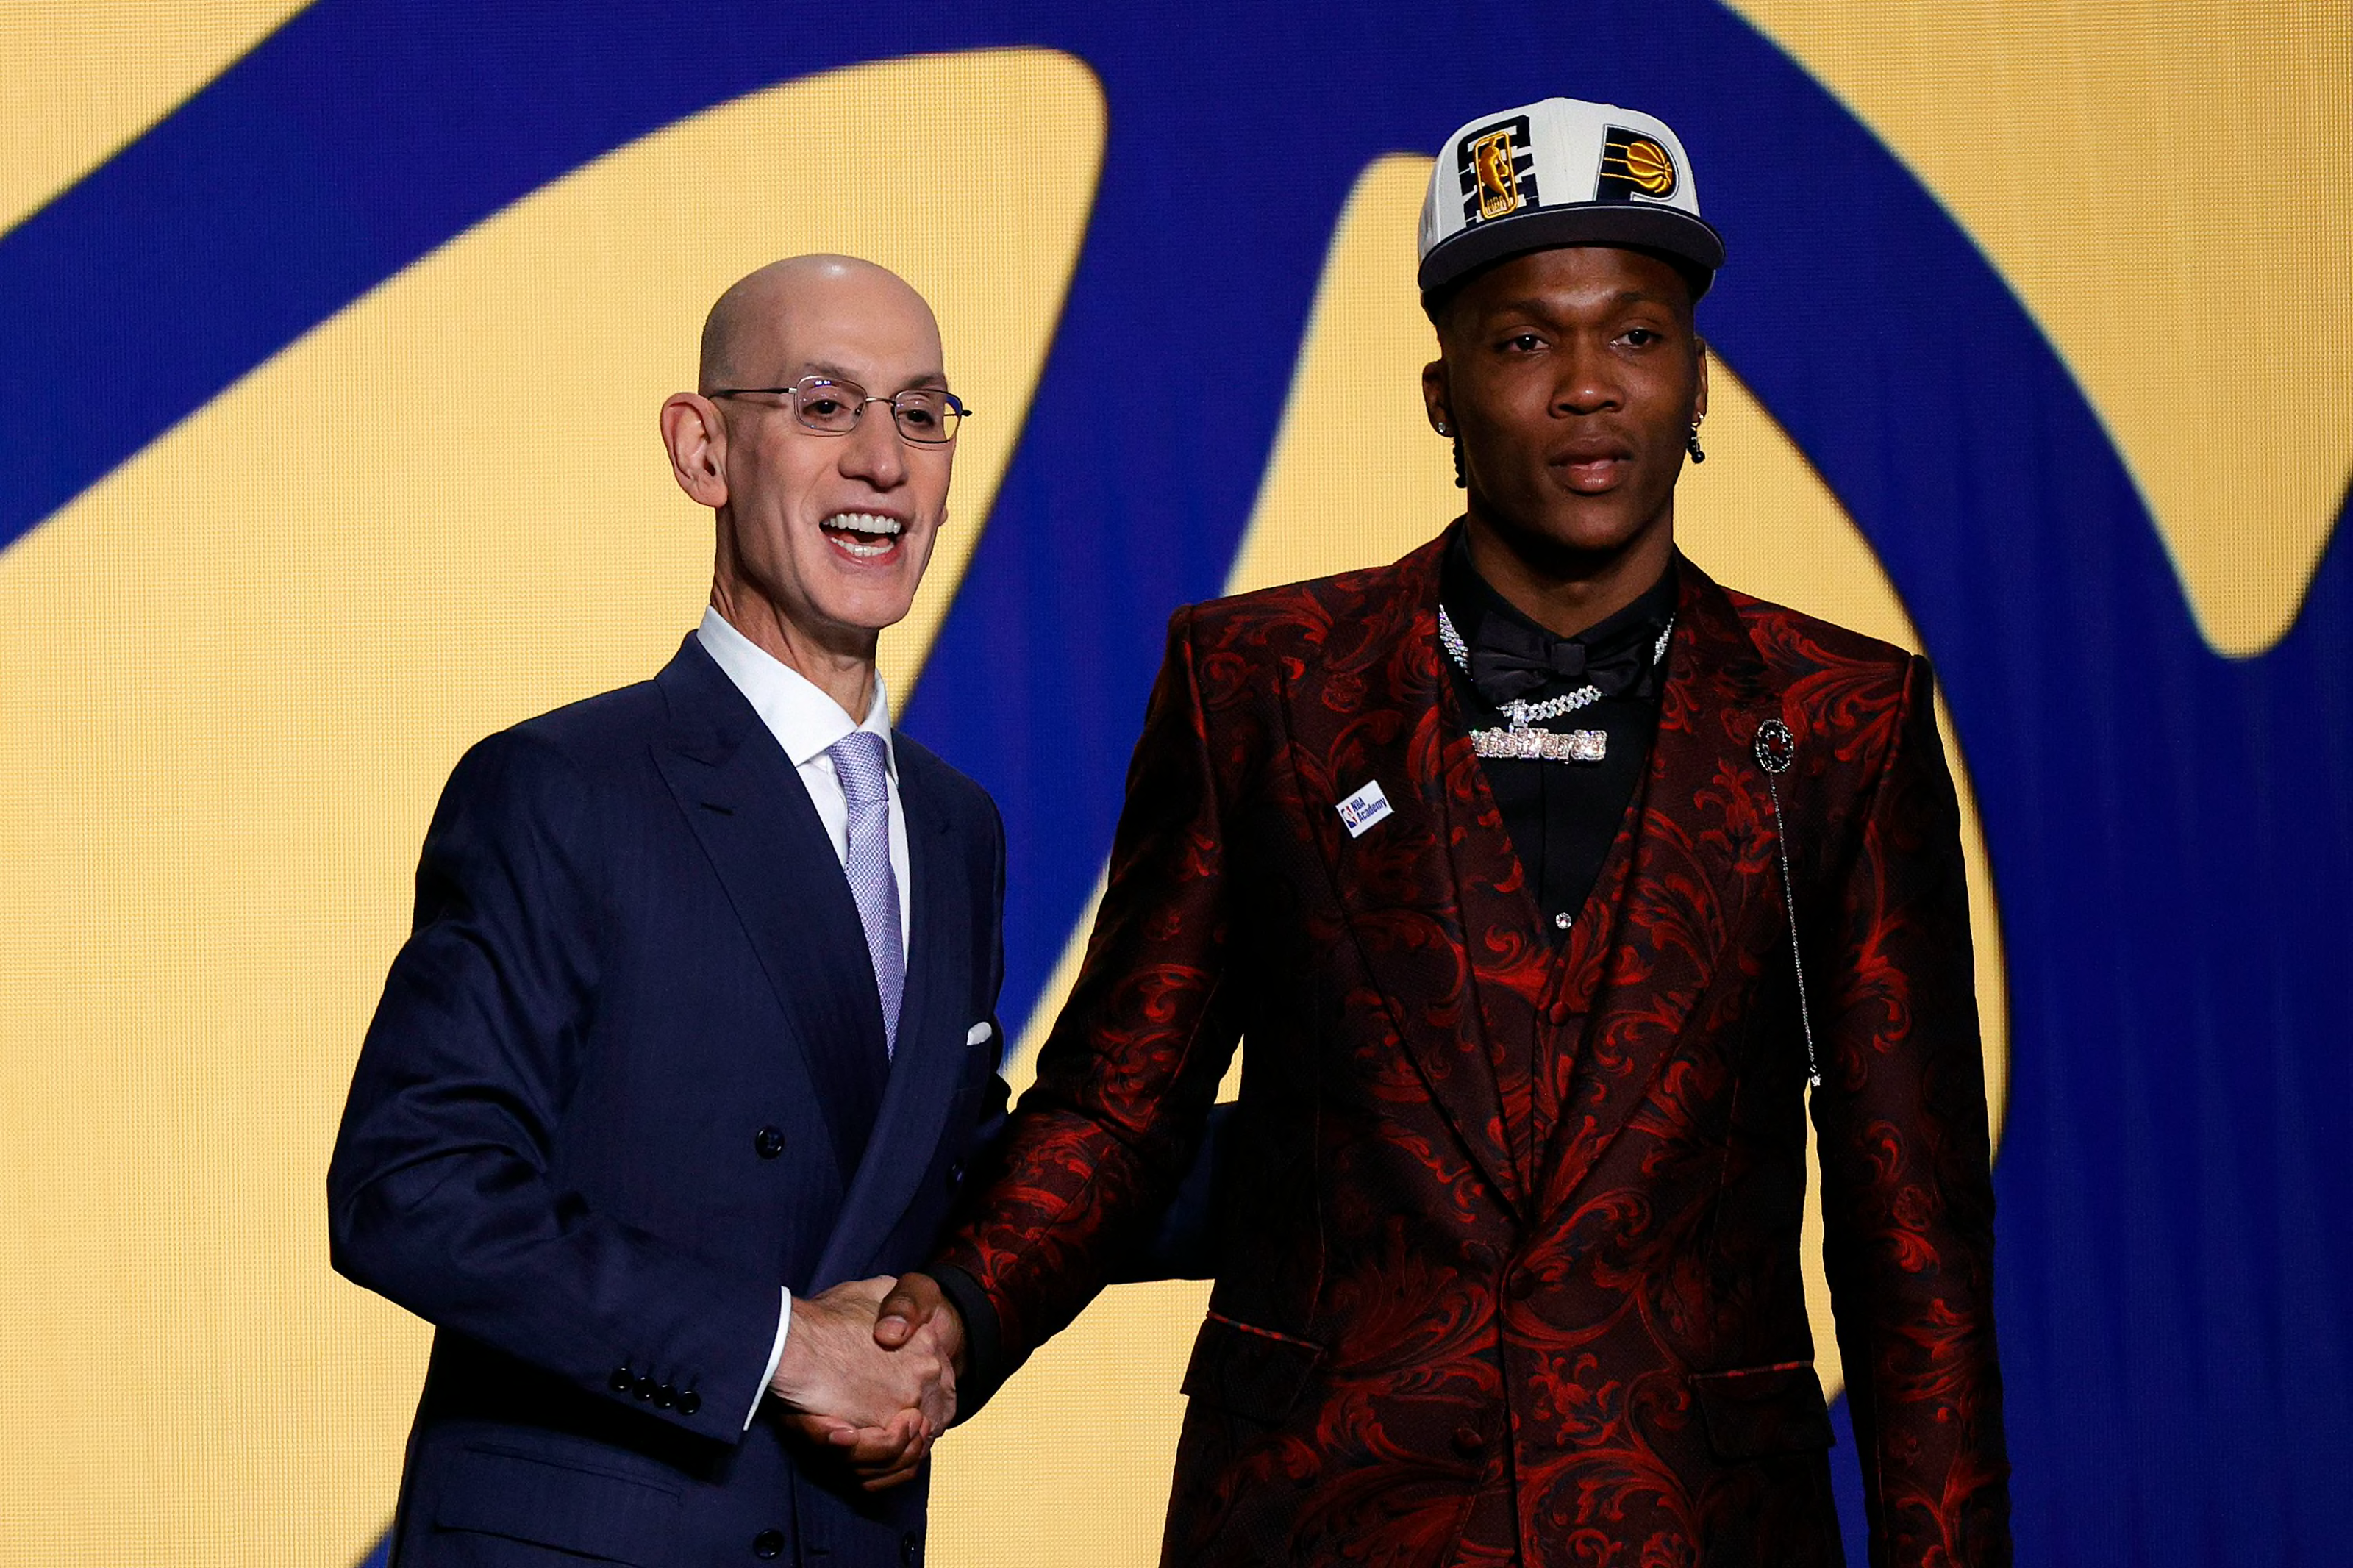 Ranking the top 3 League Pass teams after the 2022 NBA Draft